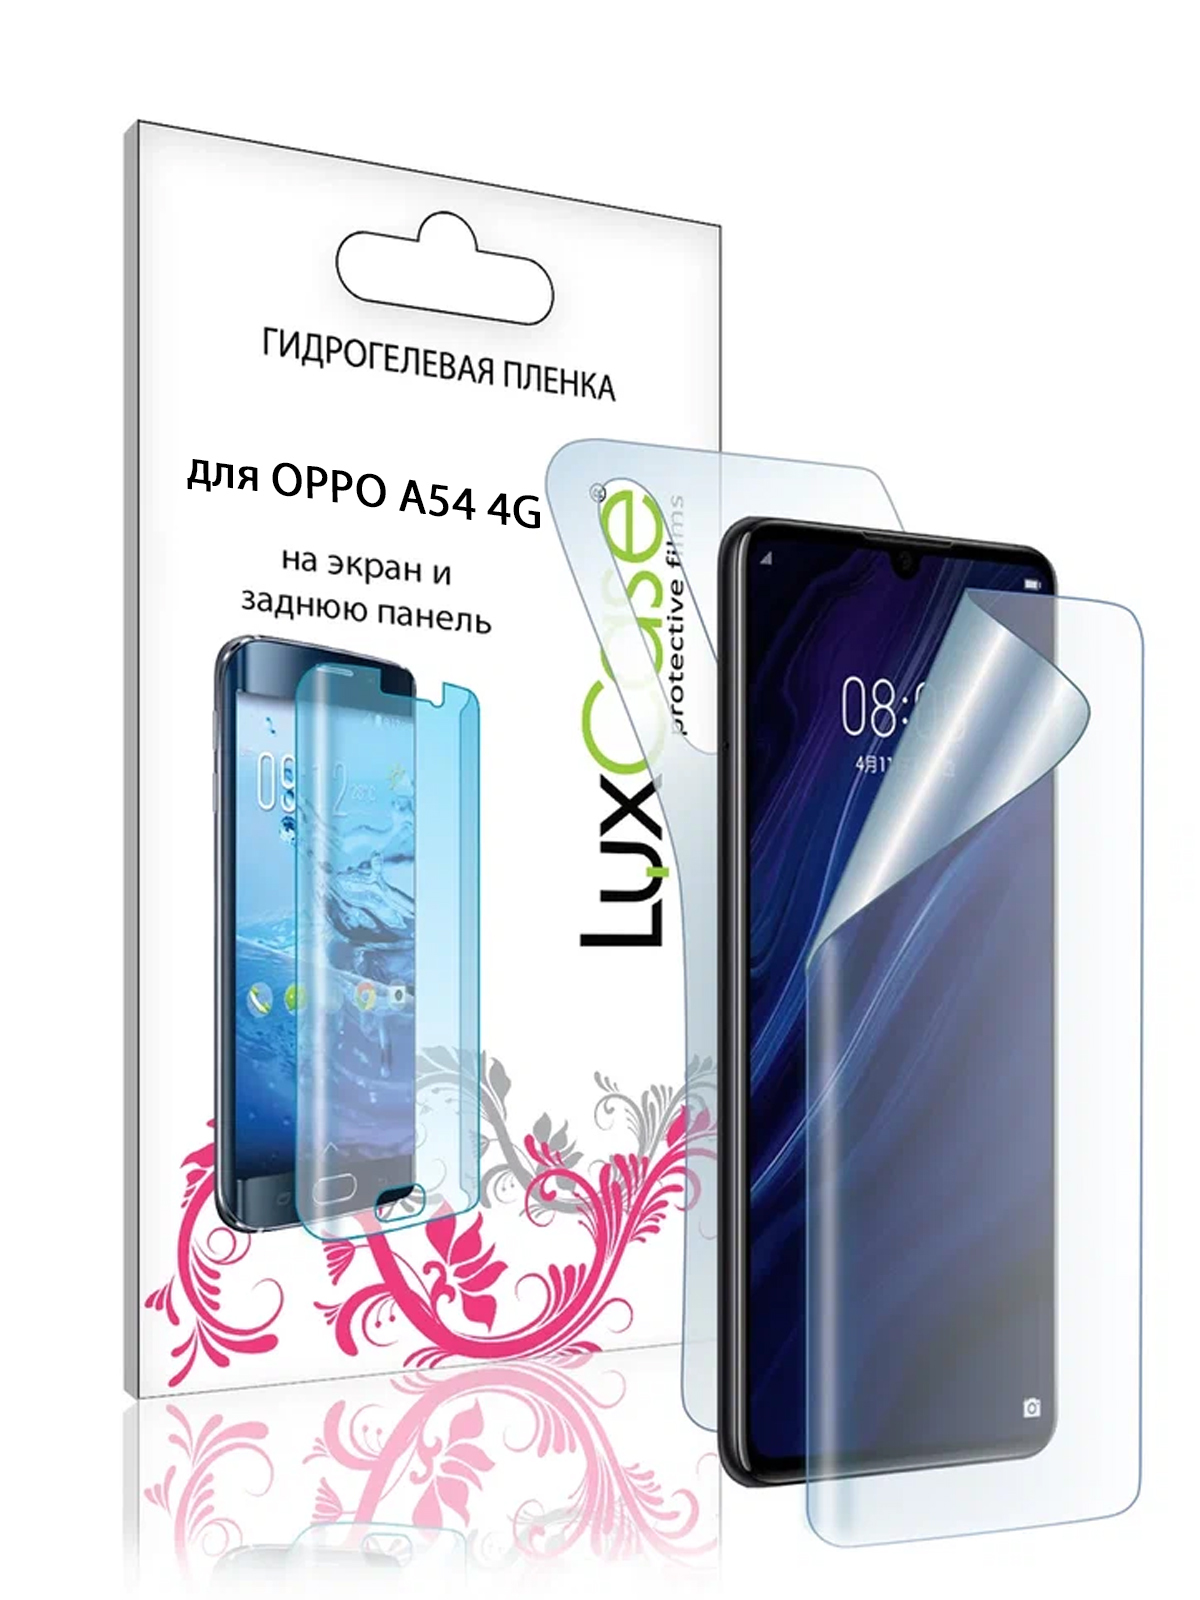 Пленка гидрогелевая LuxCase для Oppo A54 Front and Back Transparent 86397 гидрогелевая пленка luxcase для oppo a54 front and back transparent 86397